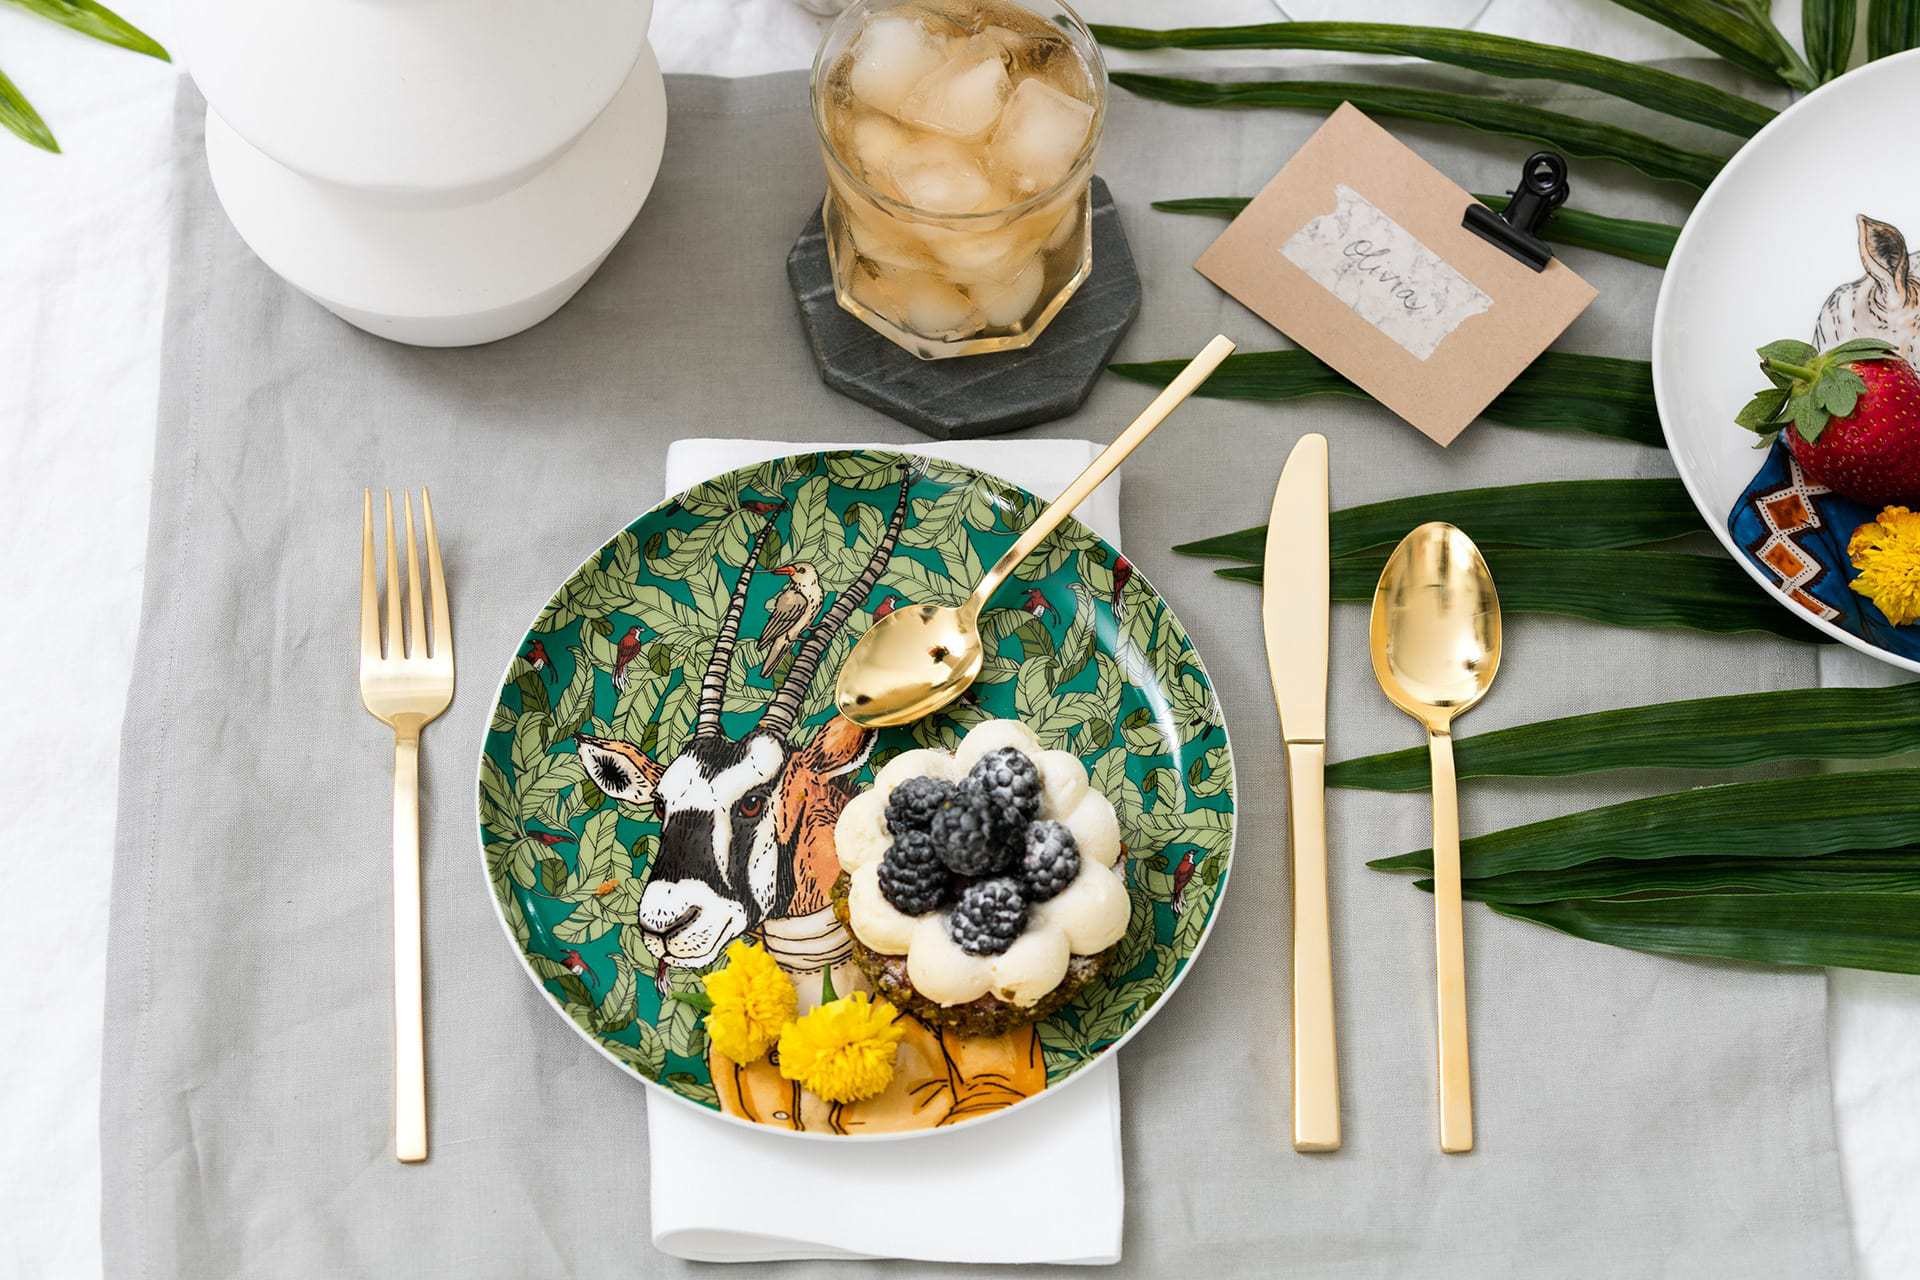 west elm goat plate with gold cutlery set and palm leaf on table